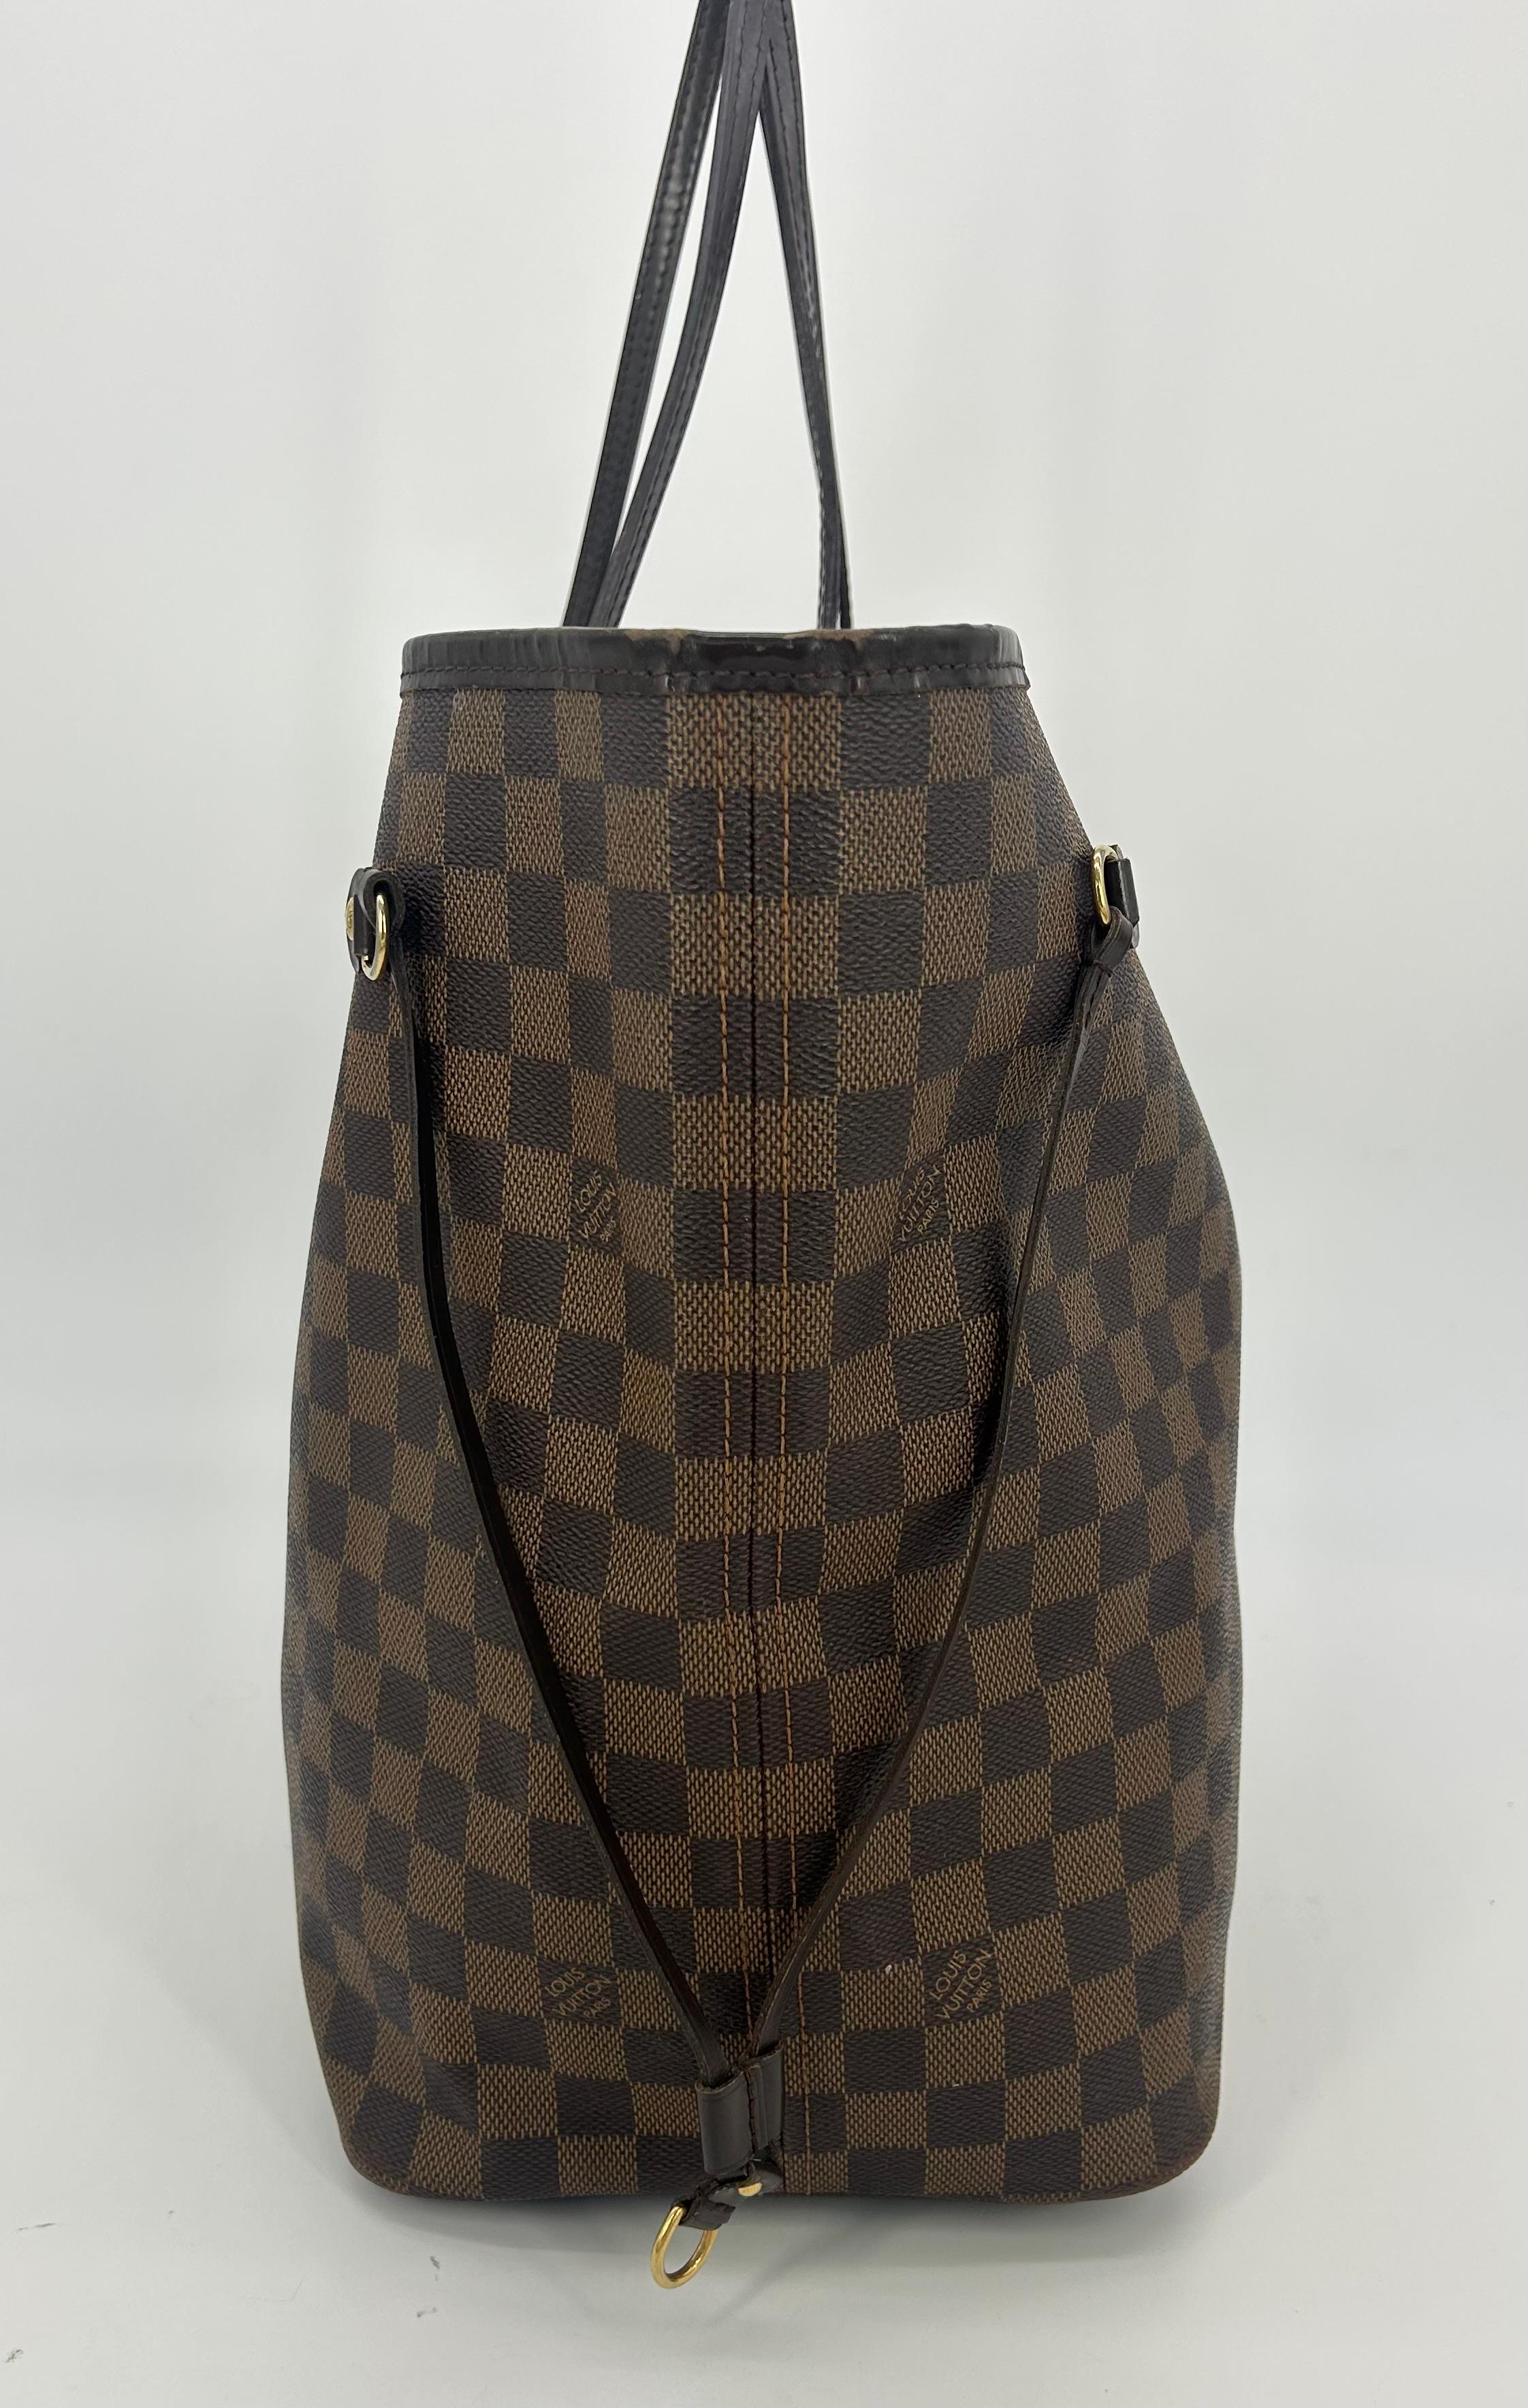 Louis Vuitton Neverfull GM Damiere Ebene In fair condition. Signature brown and dark brown checkered Damiere Ebene coated canvas exterior with dark brown leather handles and trim. Top gold buckle closure opens to red and black striped canvas